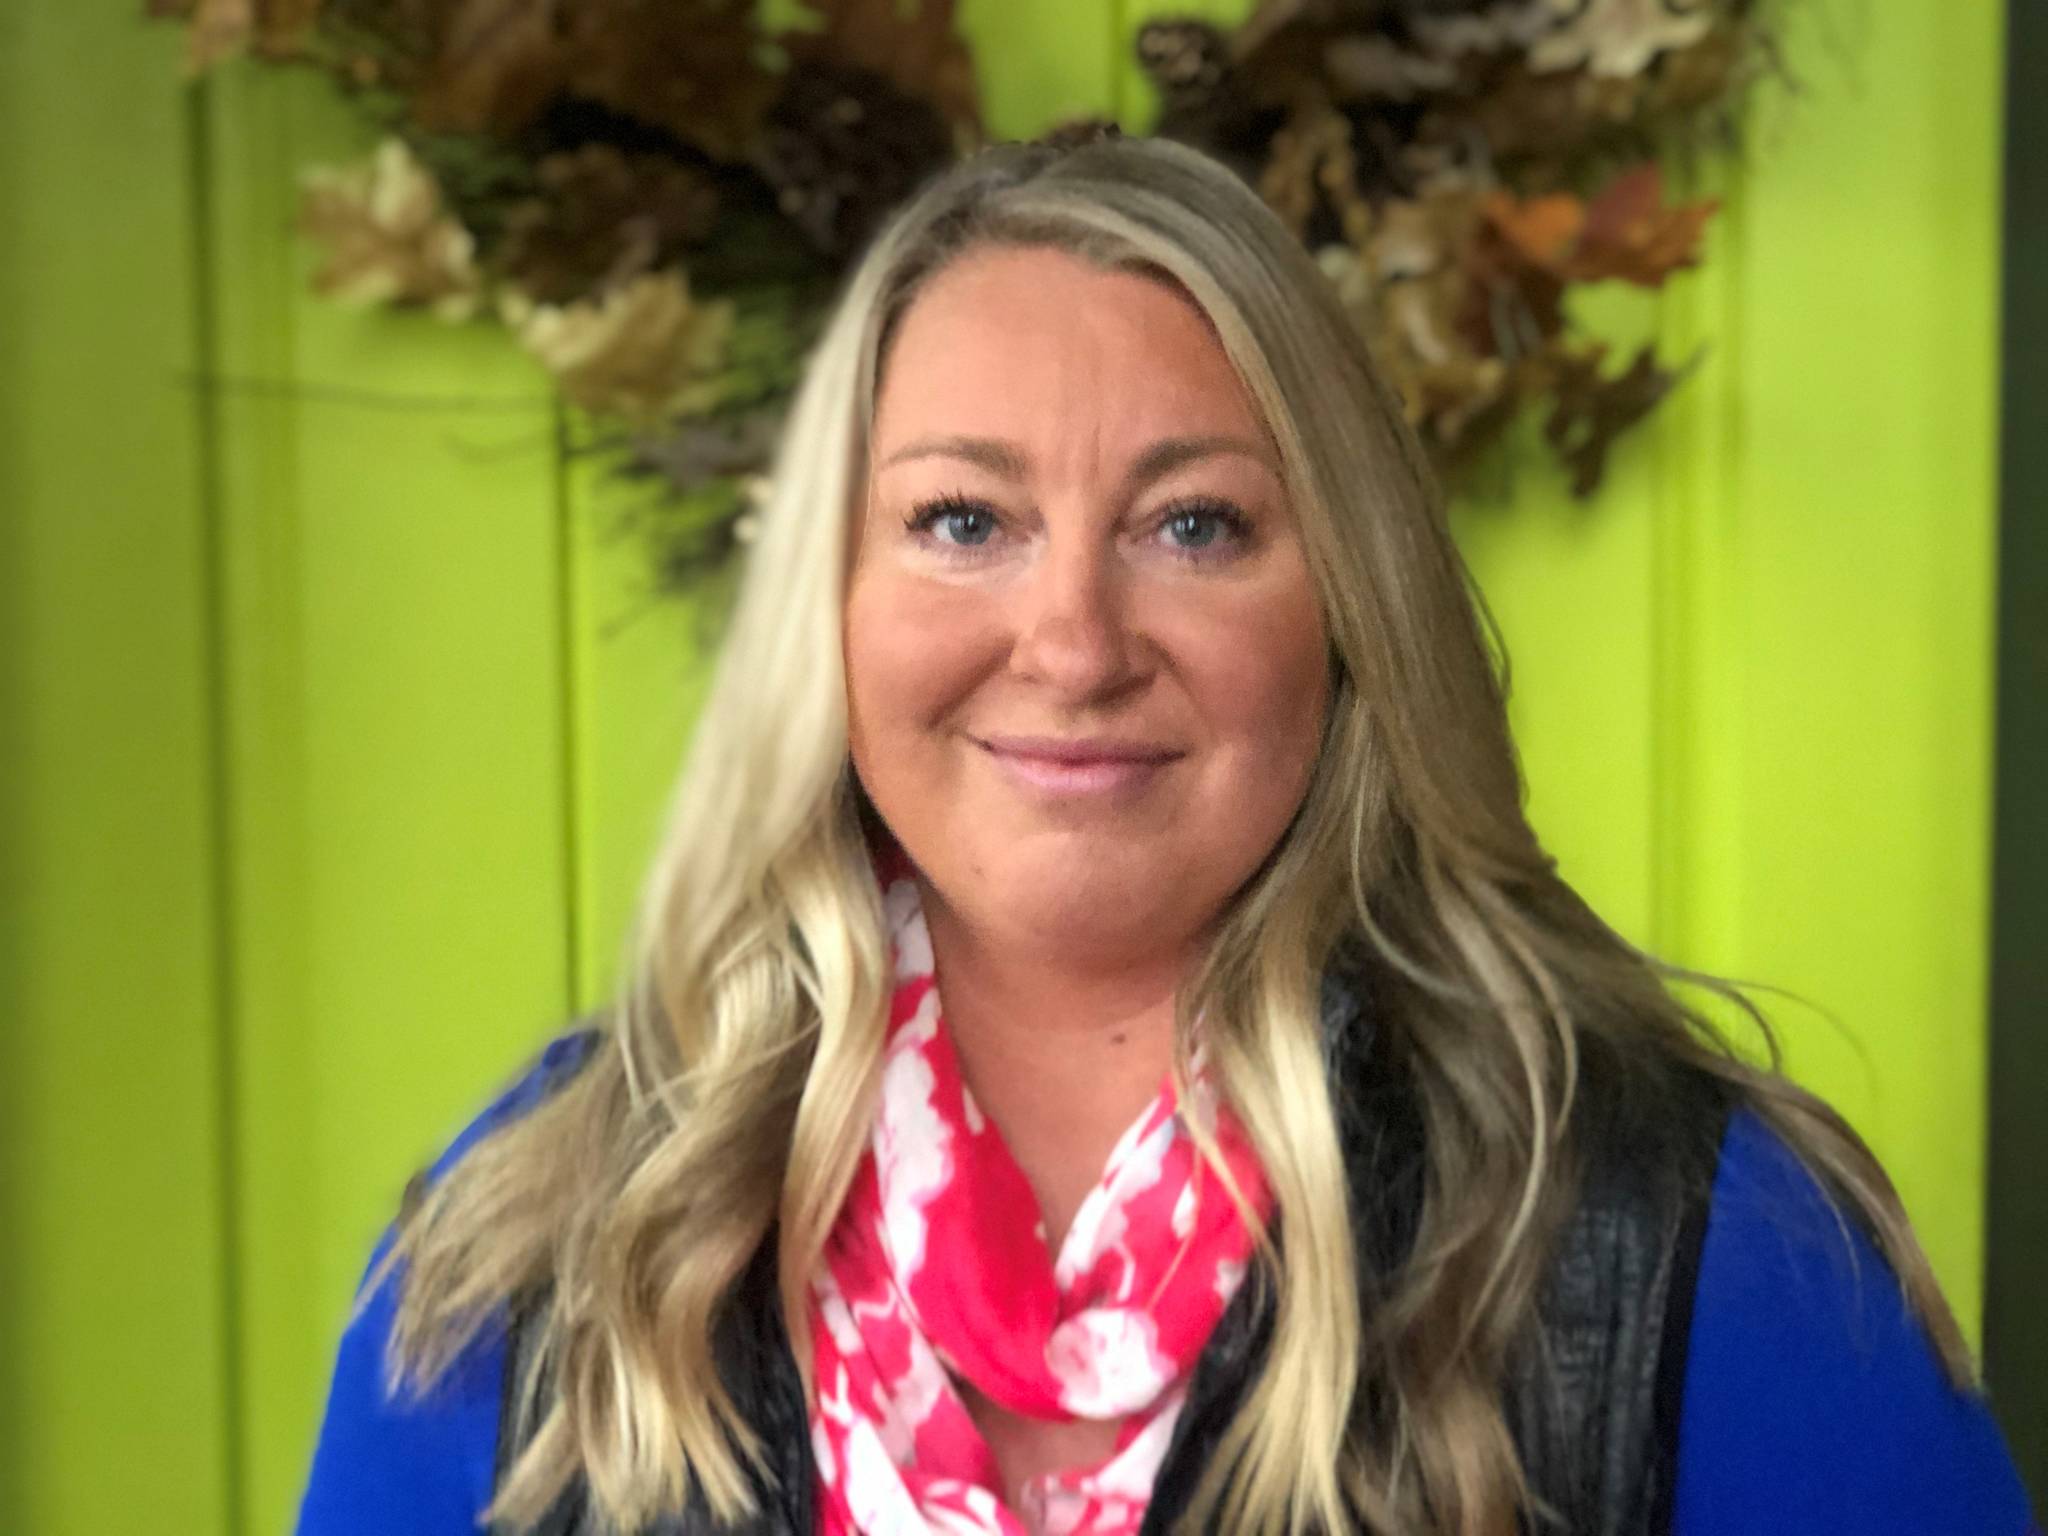 Jill Schaefer, the new office director for Gov. Mike Dunleavy’s regional office in Soldotna, is seen here in this undated photo. (Courtesy Jeff Turner/Office of the Governor)